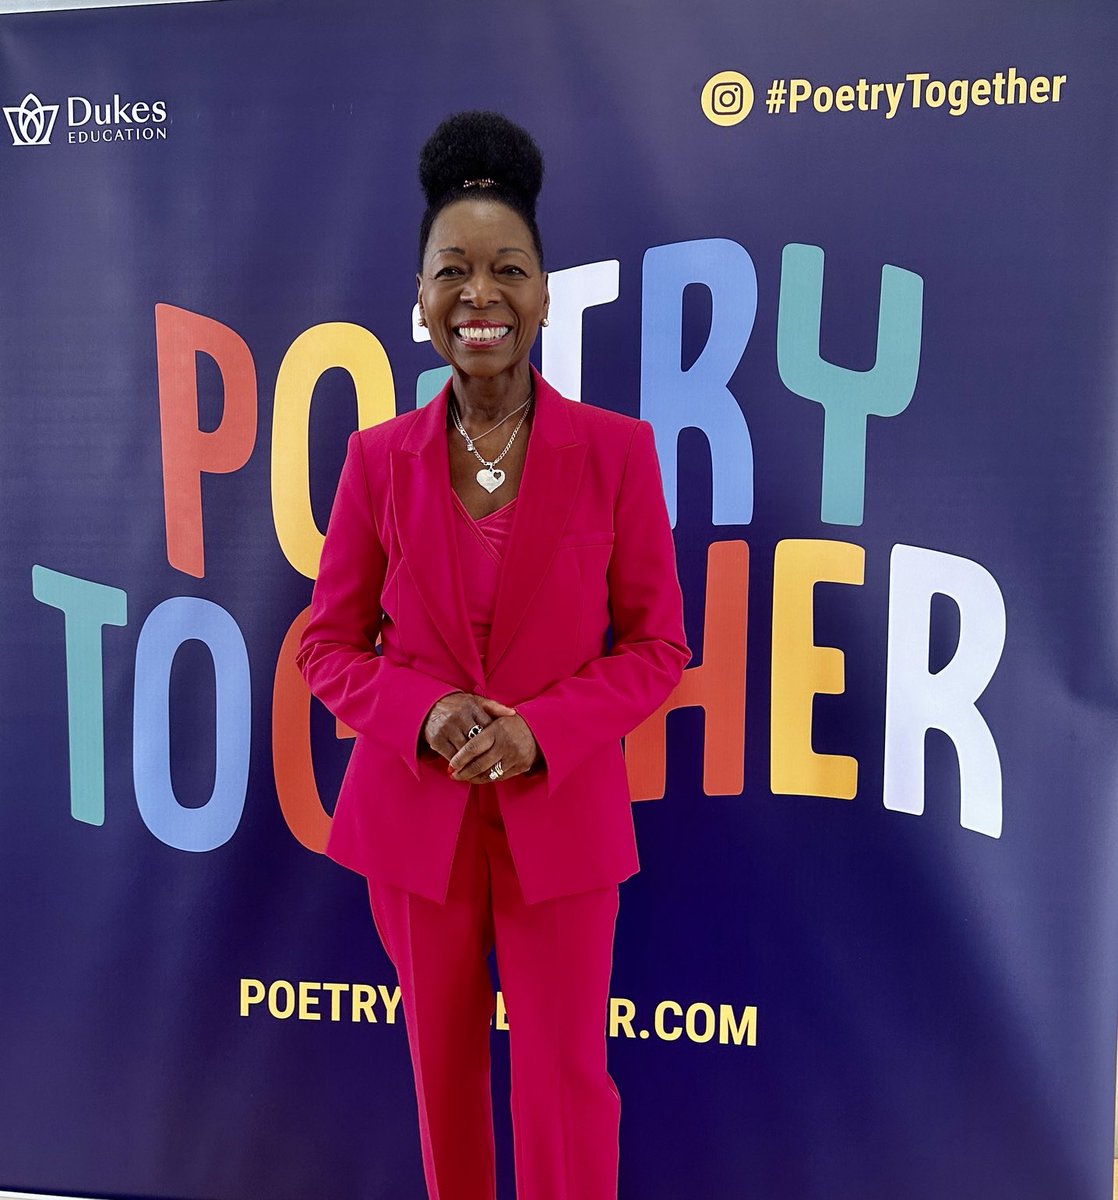 Great to be at the launch of #PoetryTogether at @FieldingPrimary School and to hear some amusing poetry recitals from both children and their grandparents. Proud to be the Greater London Lieutenancy Champion to promote this important project ⁦@Poetry_Together⁩